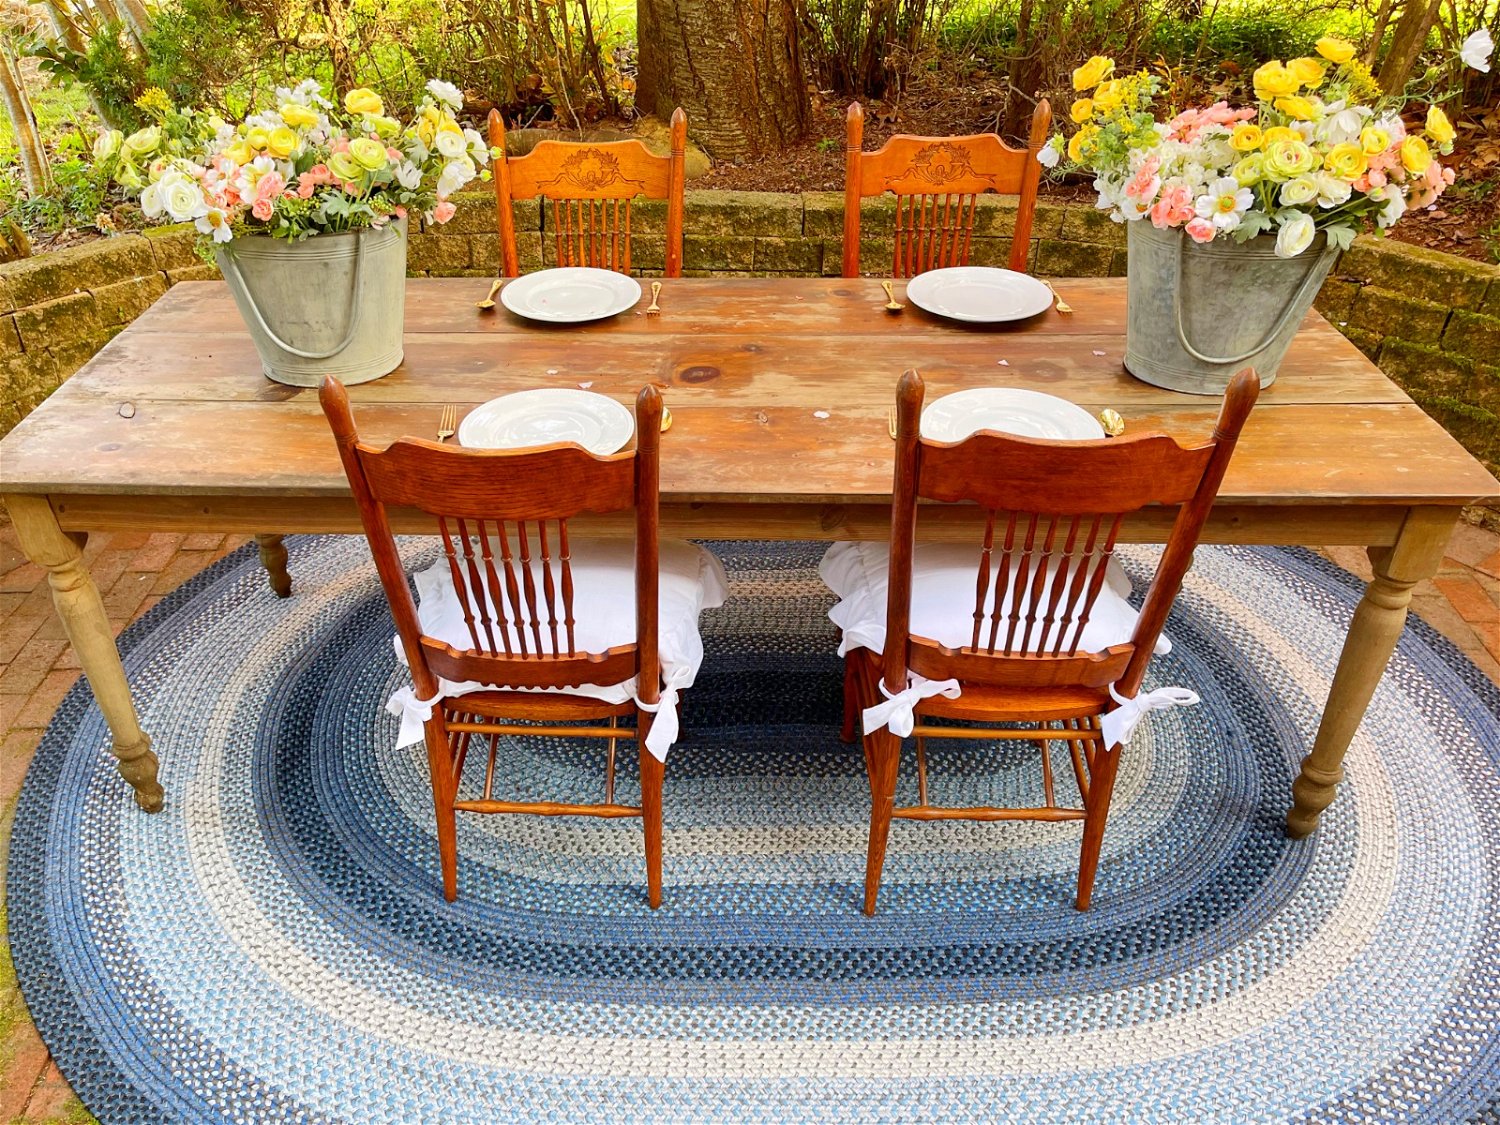 Great Falls Blue Oval Braided Rug 24x36 - with Pad